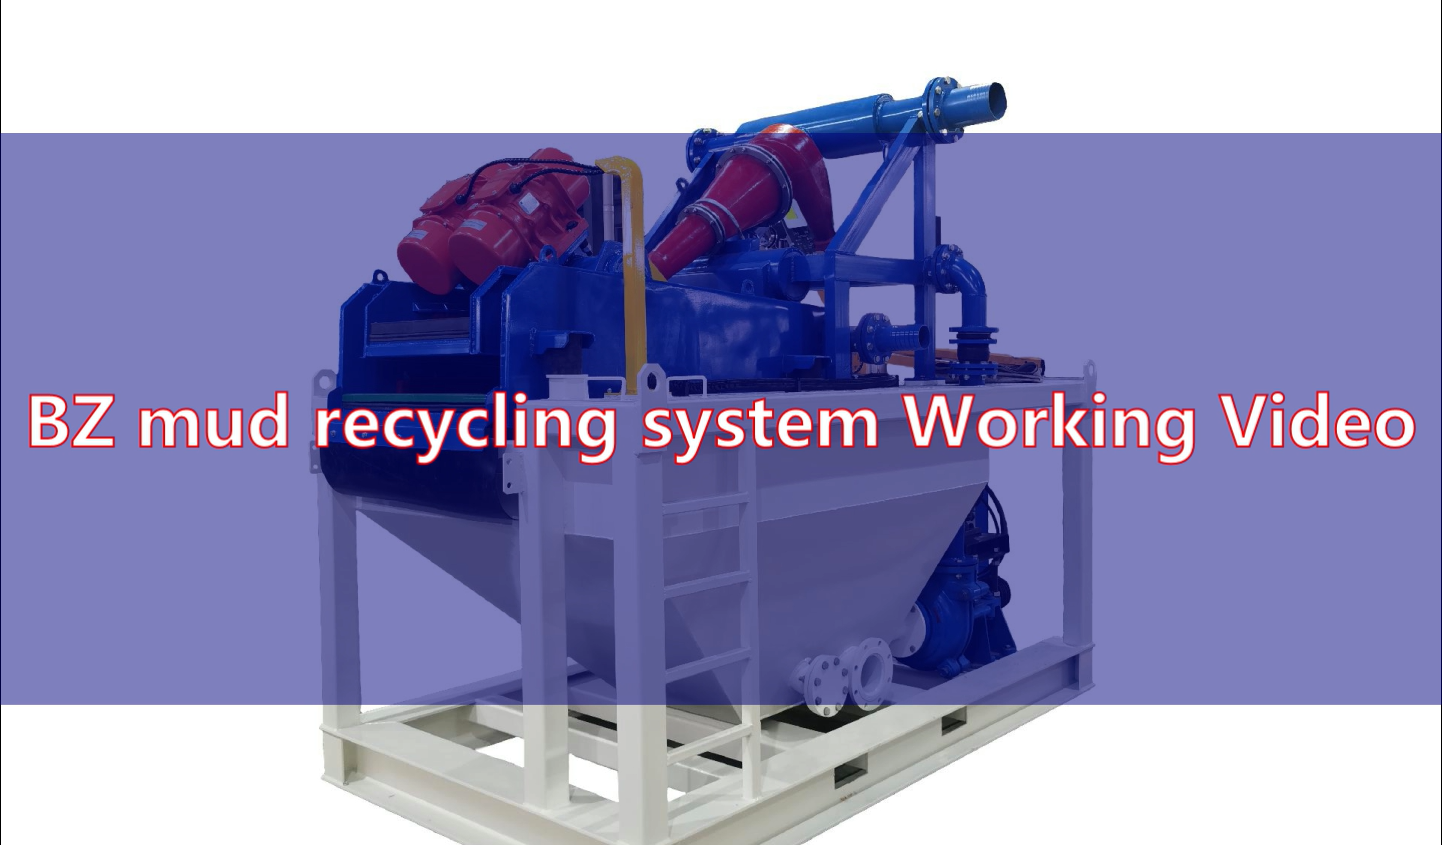 BZ mud recycling system Working Video